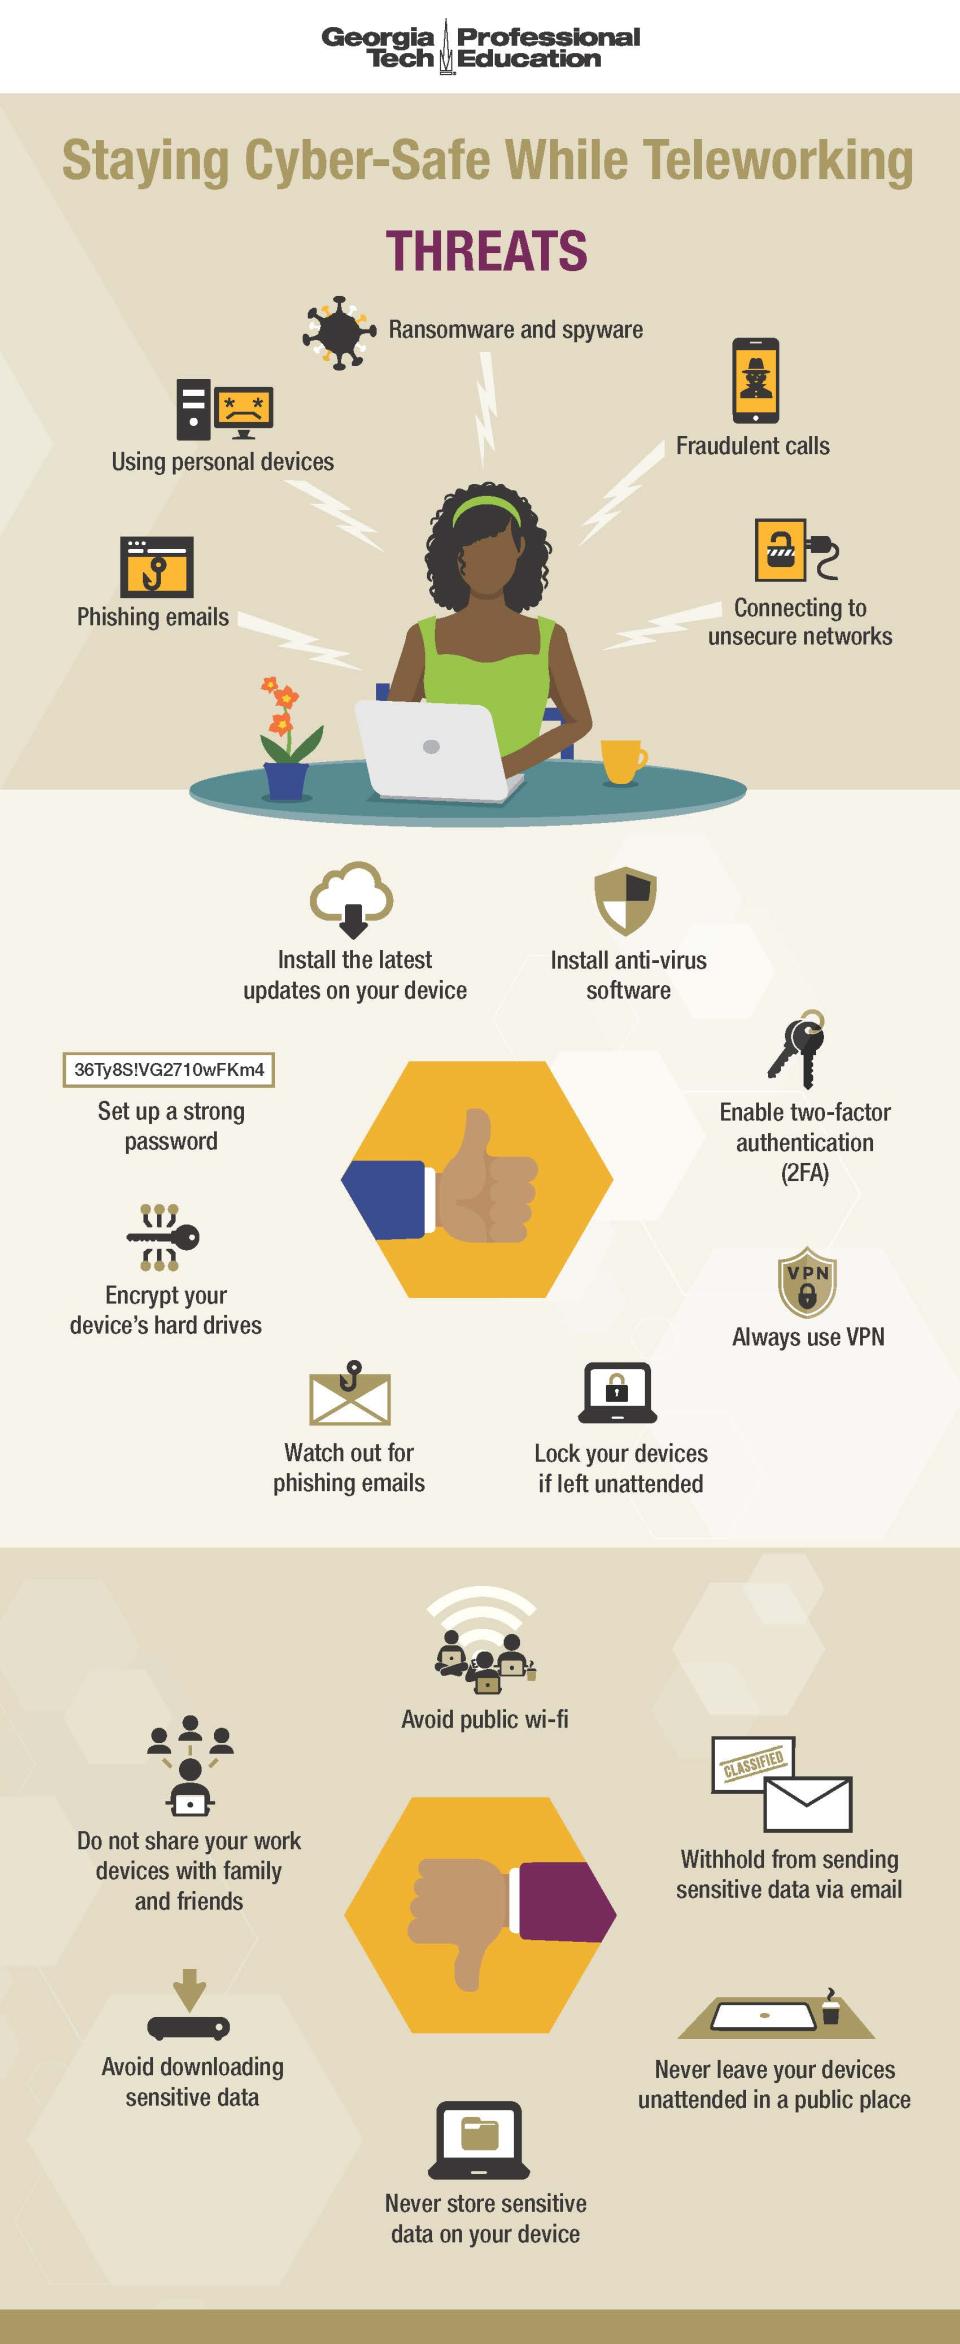 Infographic for how to stay cyber-safe while teleworking